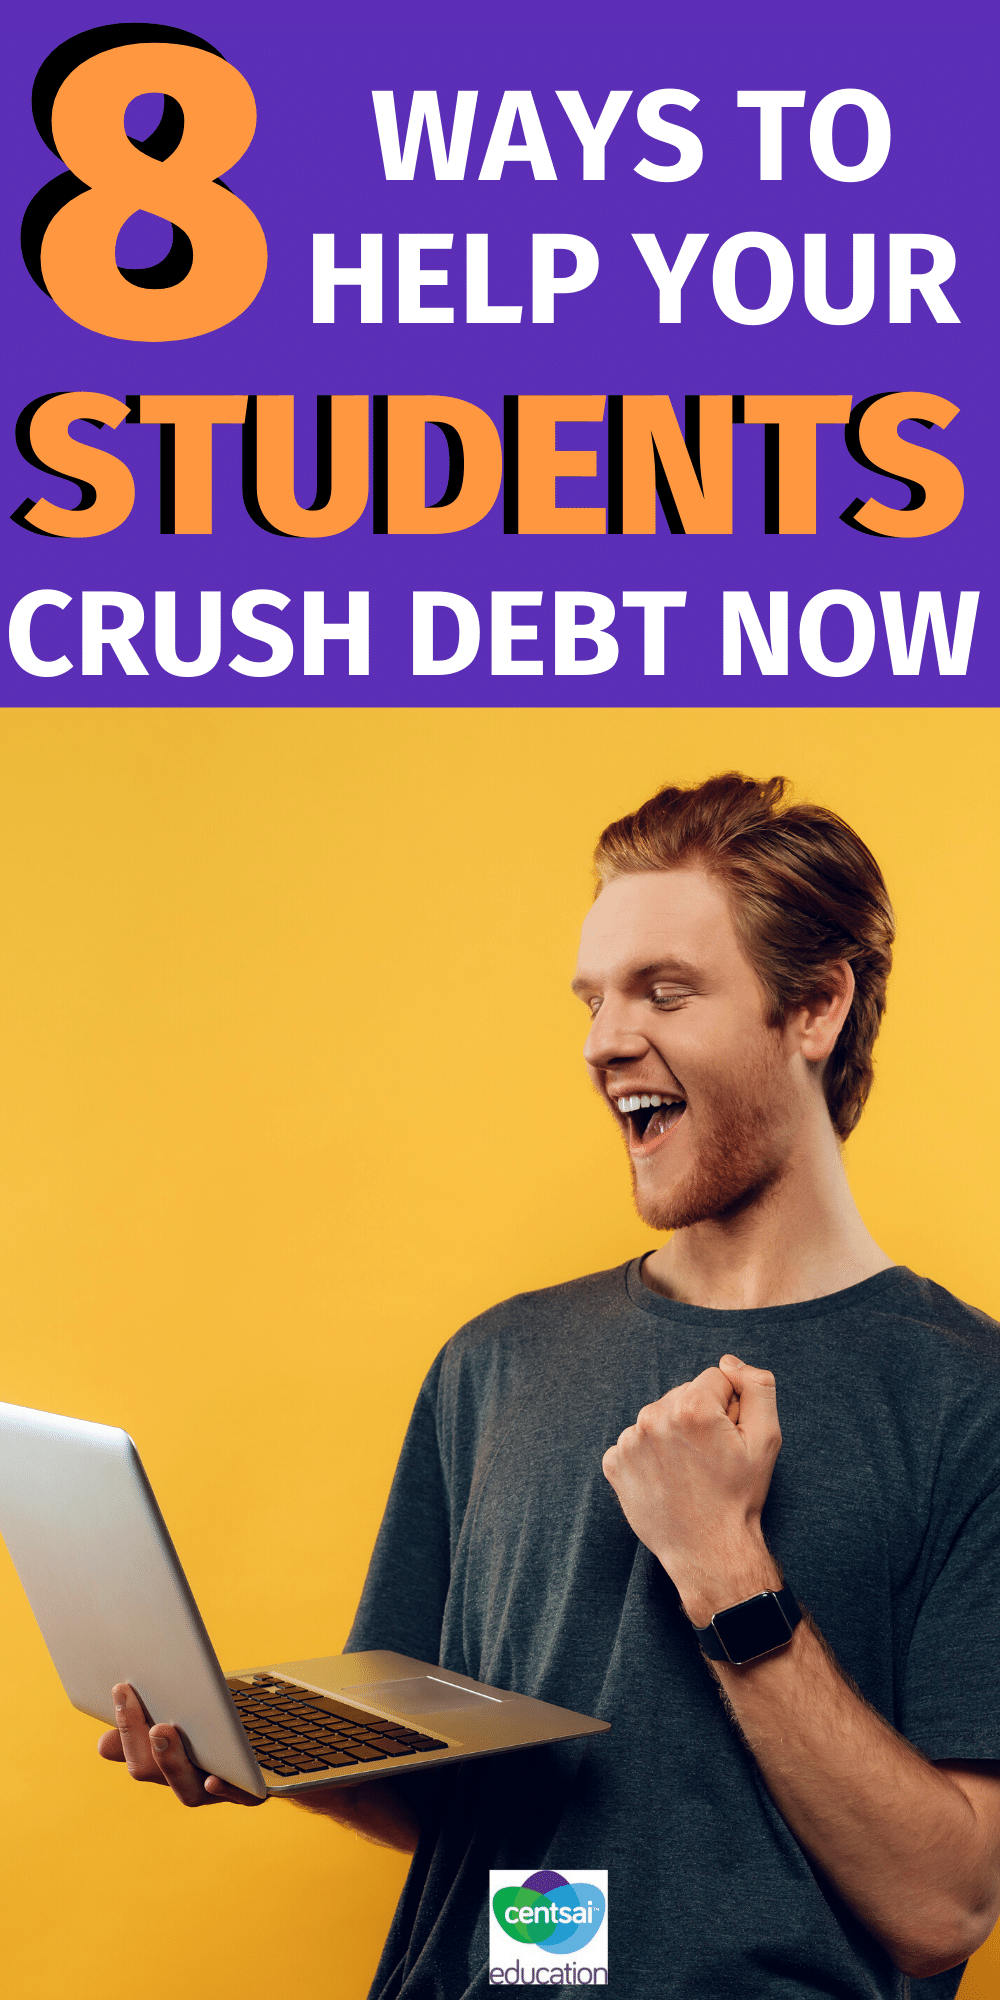 High school students may not truly understand student loan debt, or if they should take on any loans in the future. Sometimes it's unavoidable — if they have to take out a loan, teach them how to crush it with these tips.